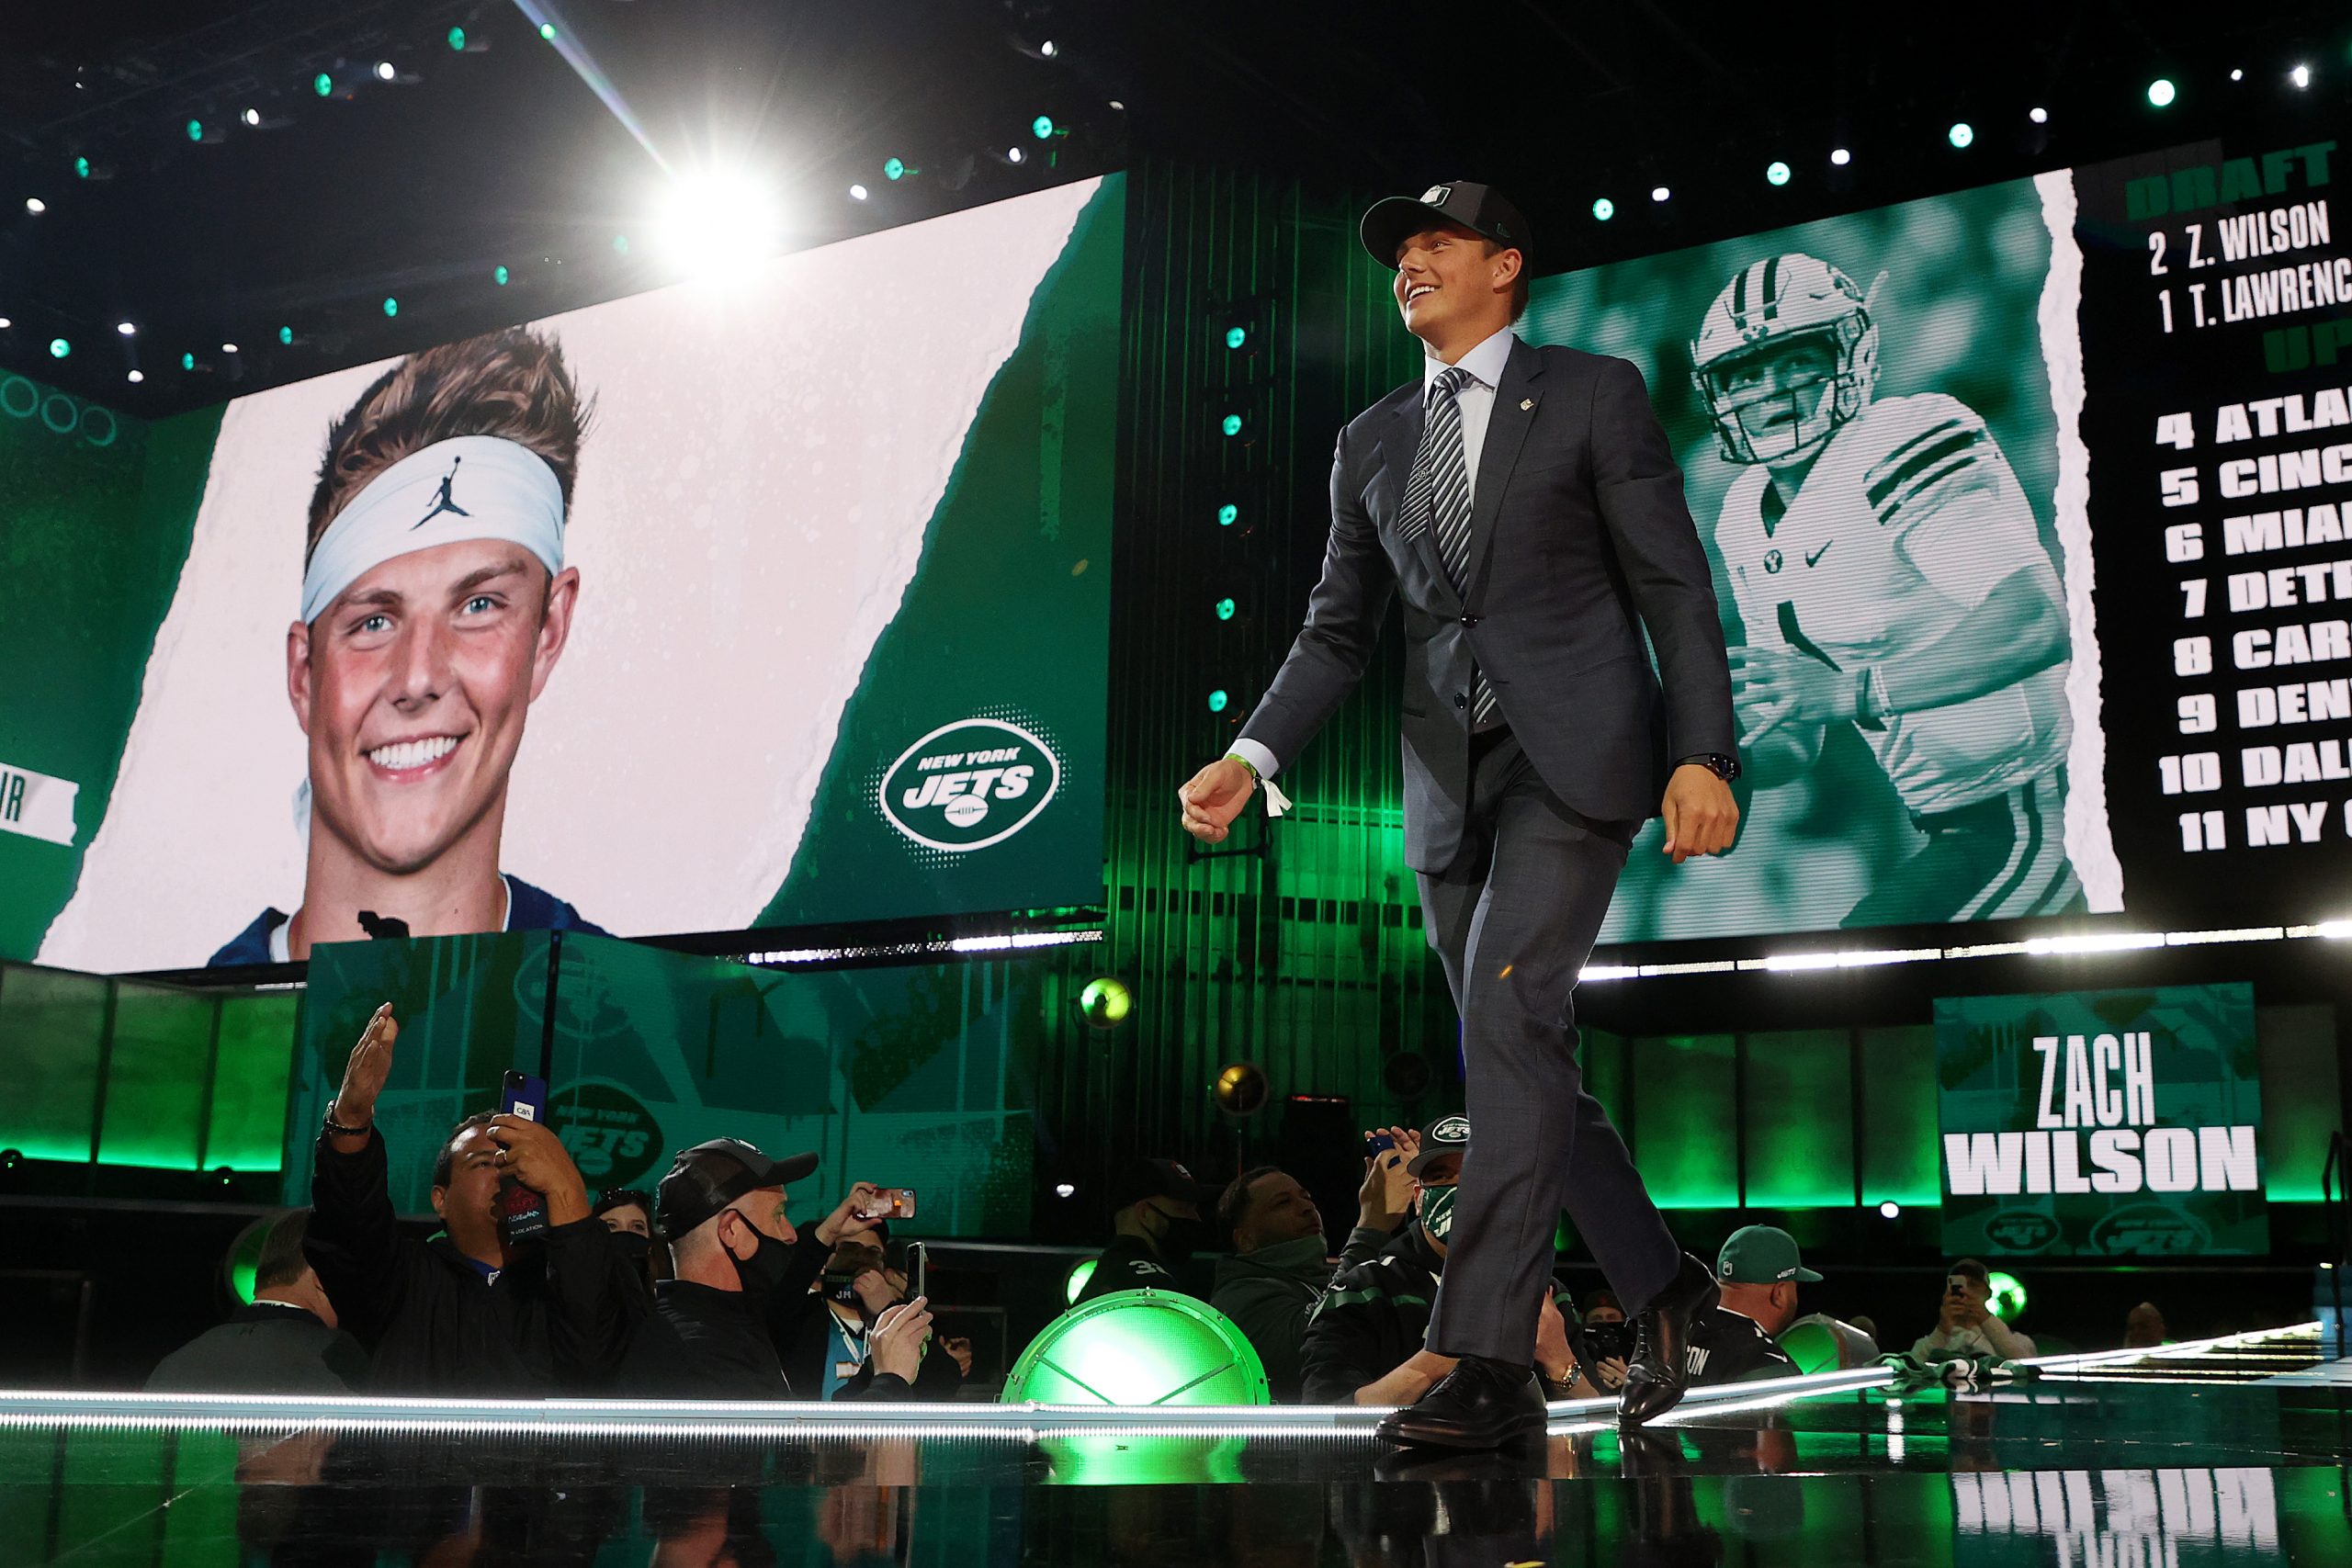 Tony Romo Delivered New York Jets Fans a Bright Promise About Zach Wilson’s Future